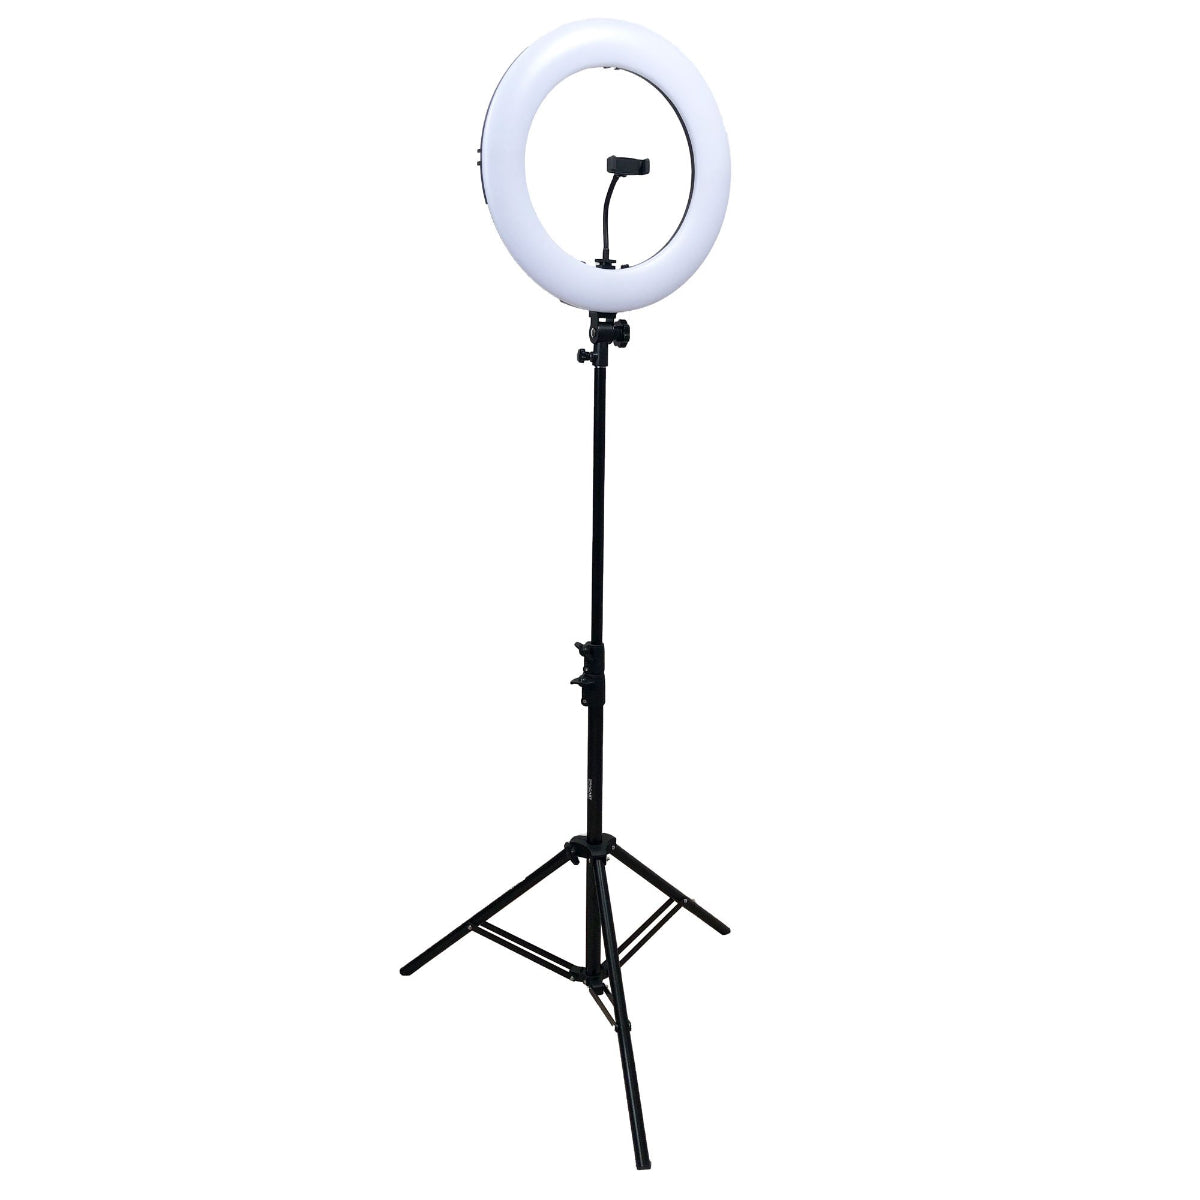 Cassory C-R100 LED Ring Light 12W (with accessories)